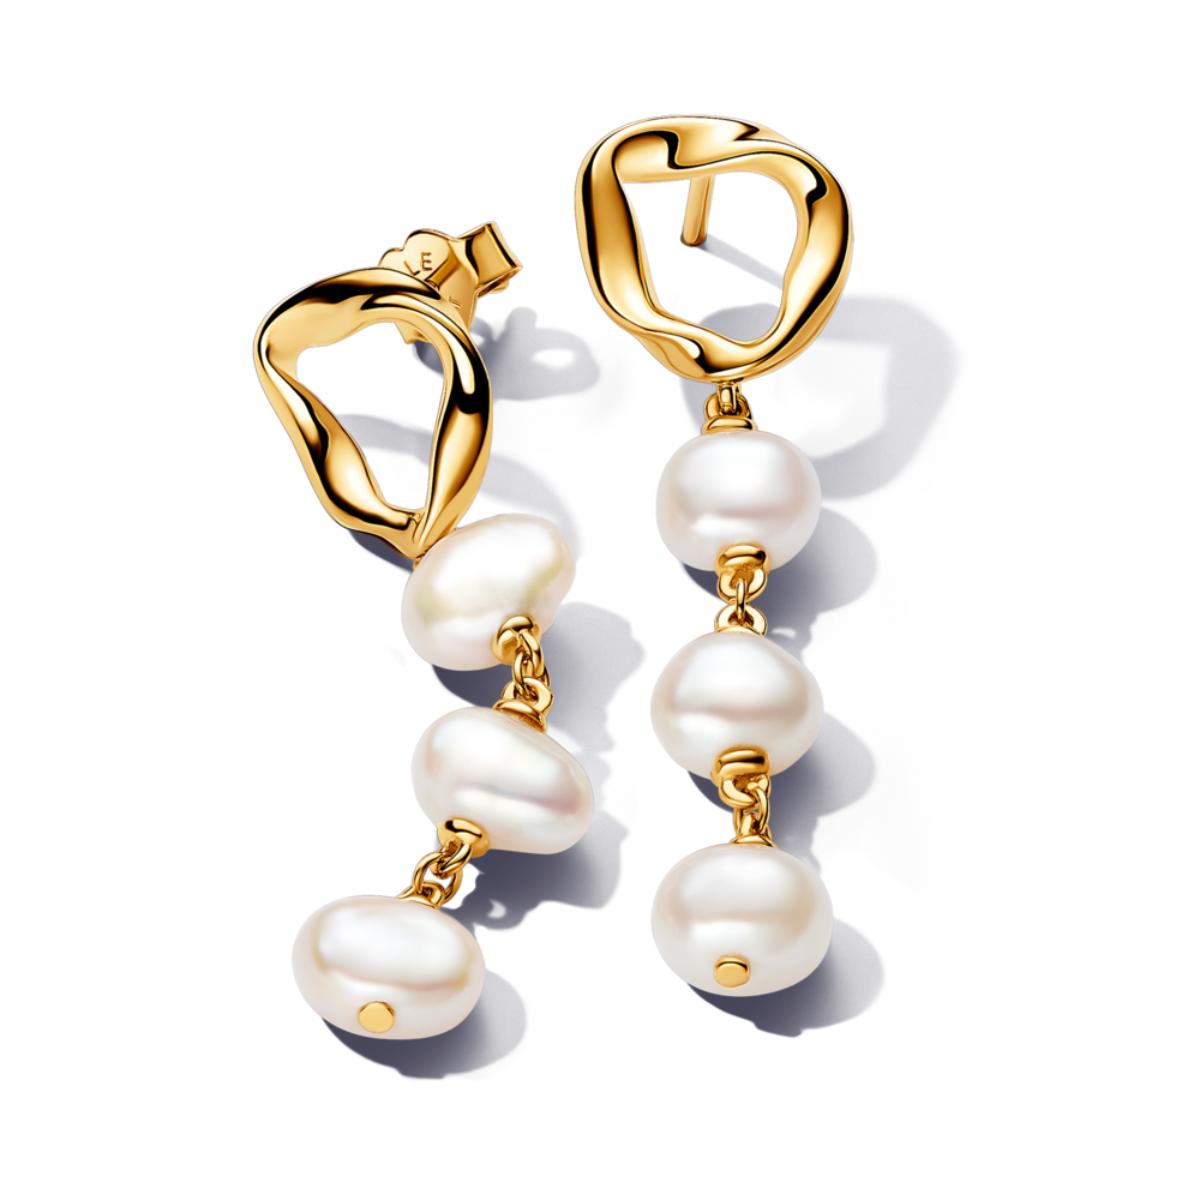 Organically Shaped Circle & Baroque Treated Freshwater Cultured Pearls Drop Earrings